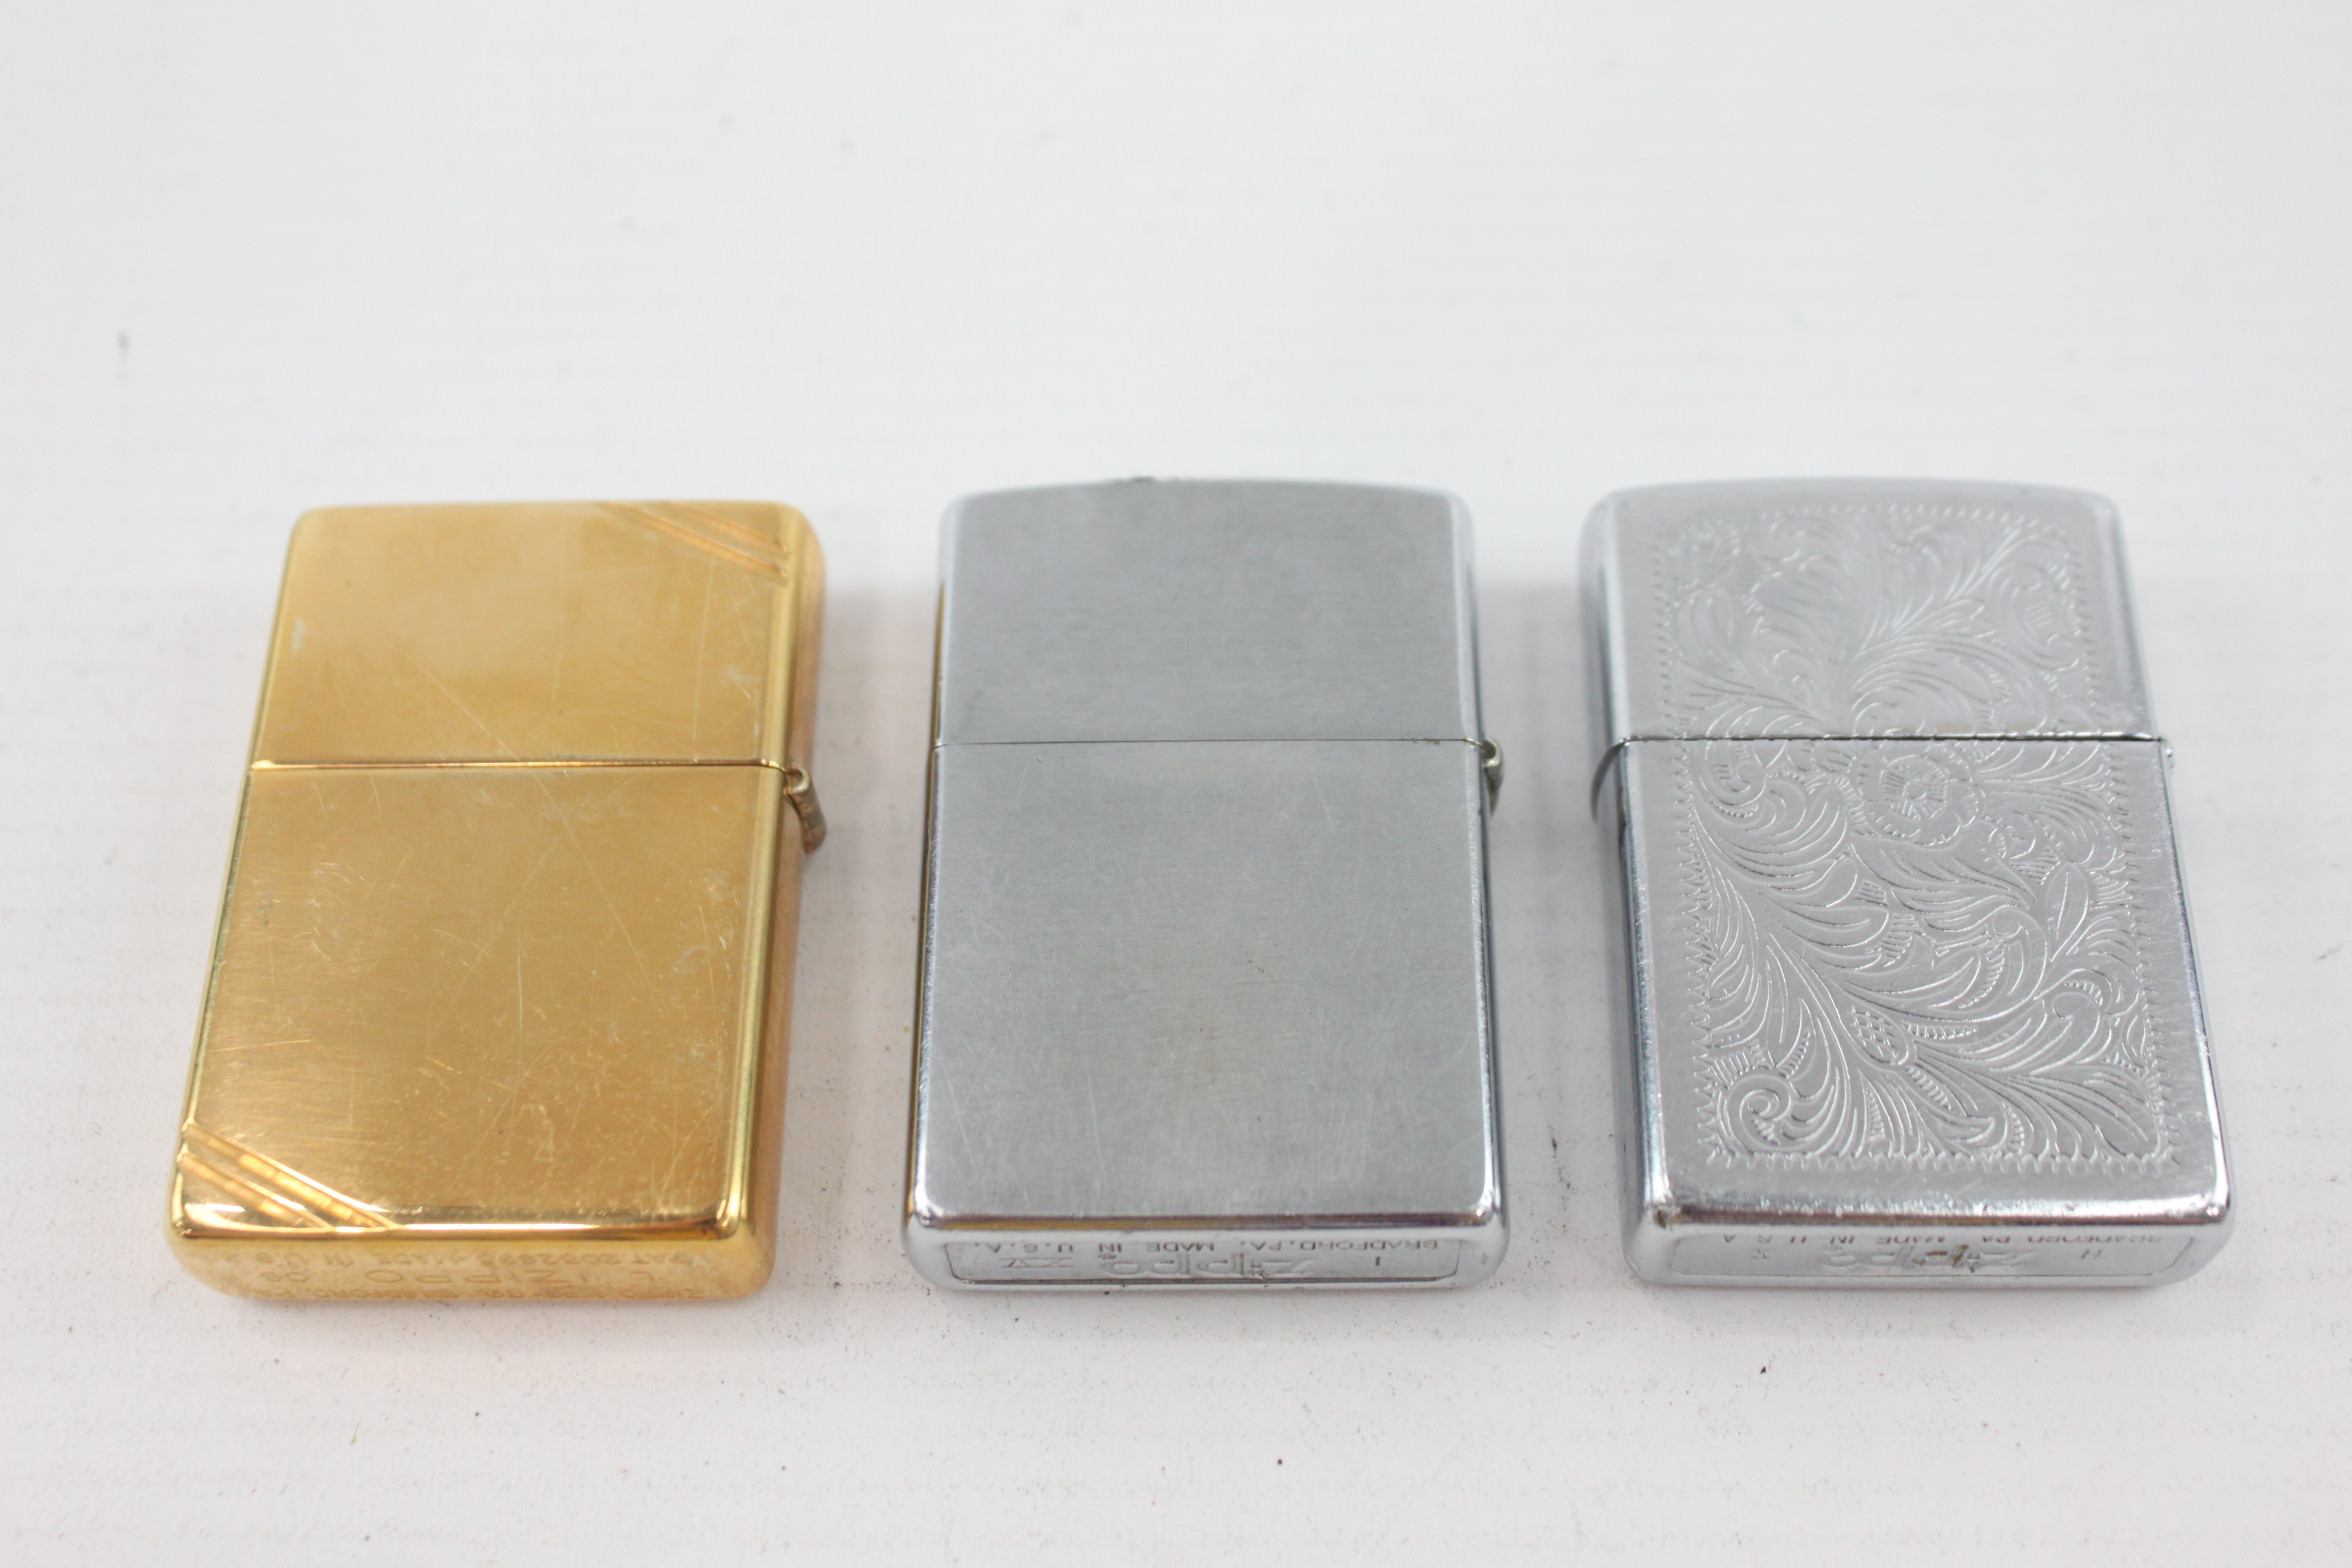 3 x Assorted Vintage ZIPPO Cigarette Lighters - Image 2 of 4